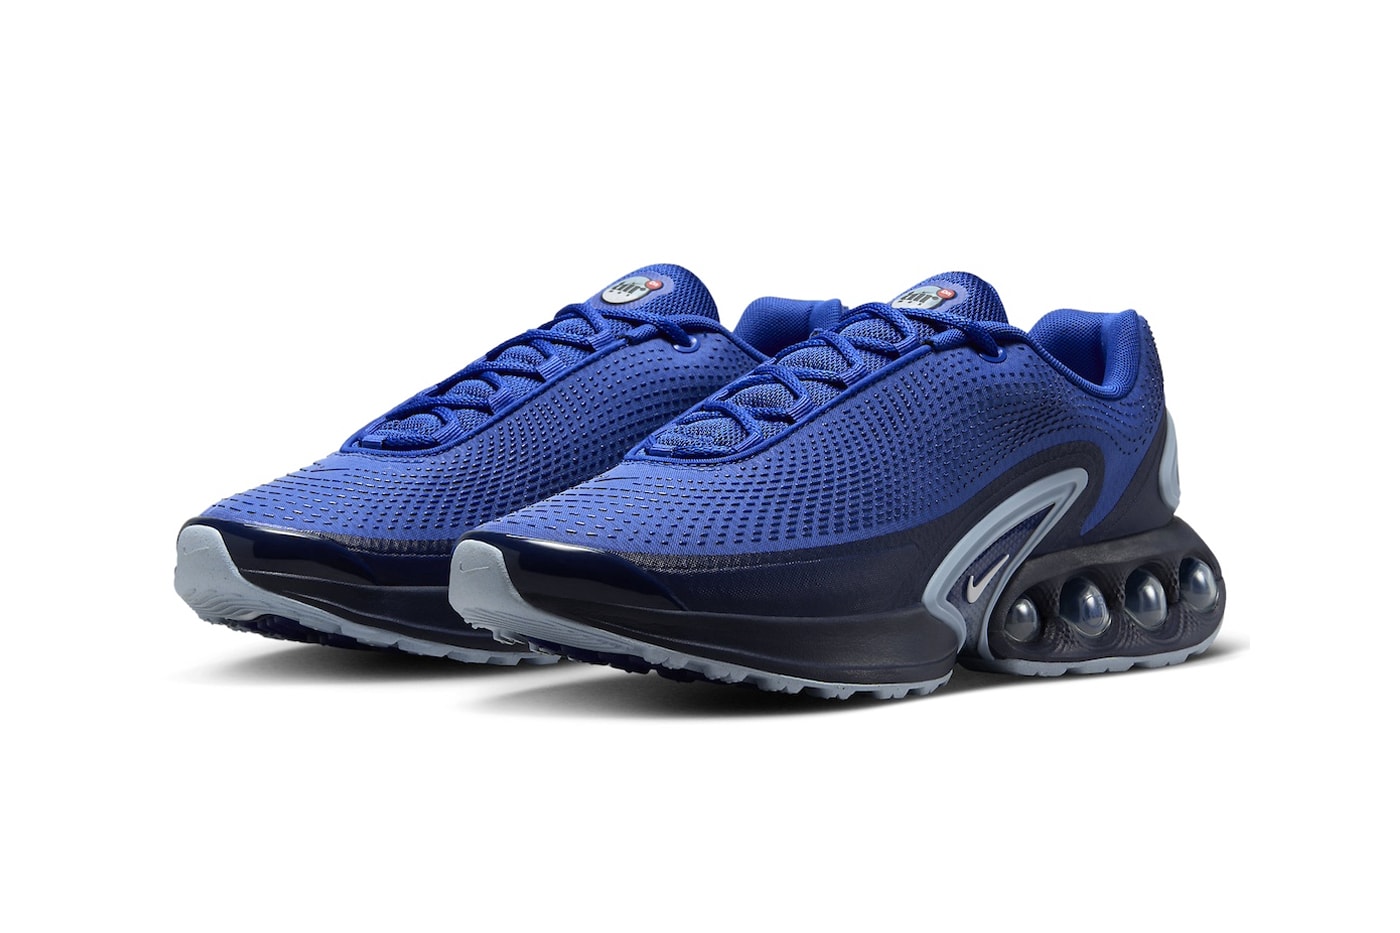 Nike Air Max Dn Surfaces in "Hyper Blue" Midnight Navy-Light Armory Blue-White DV3337-400 sneaker futuristic new silhouette swoosh air max day spring 2024 release info